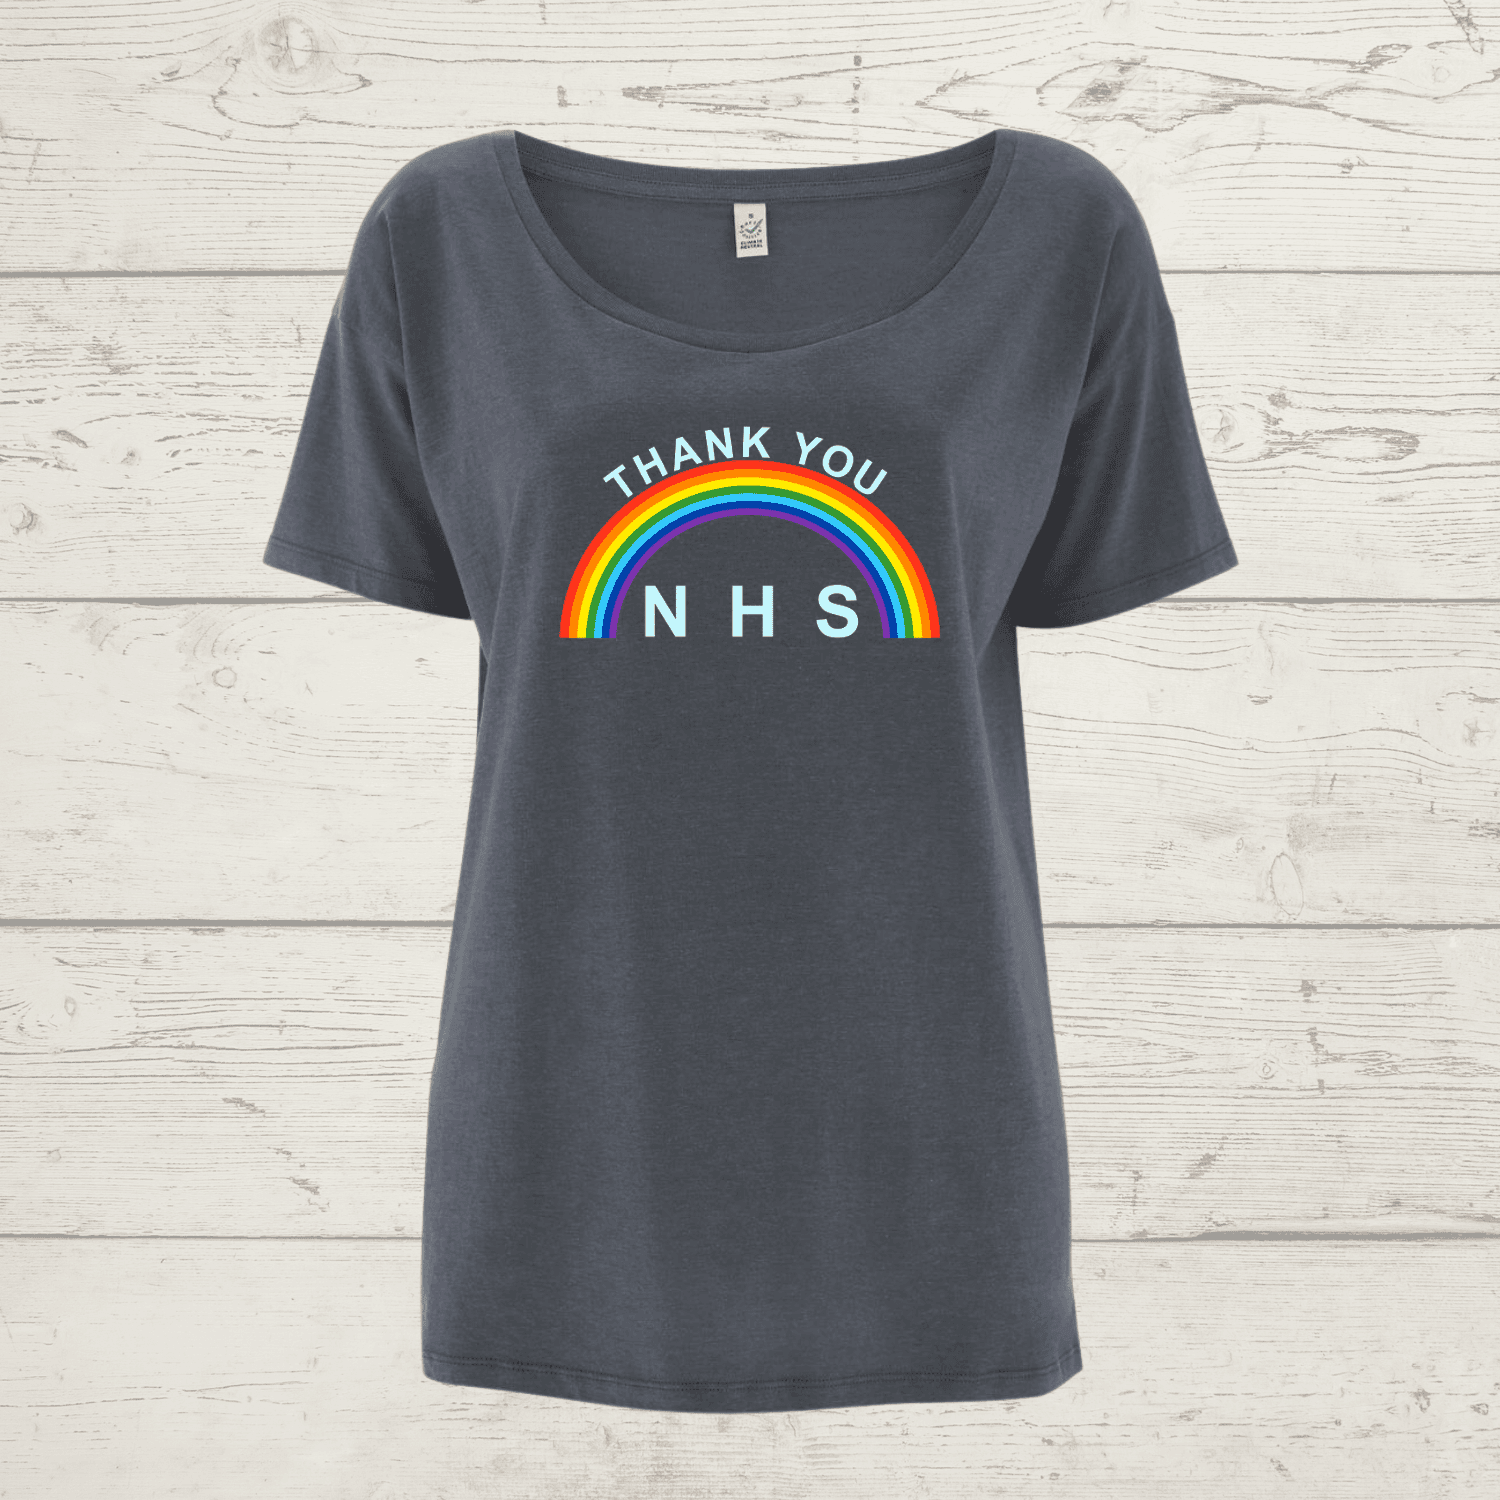 Women’s earthpositive oversized thank you nhs t-shirt -